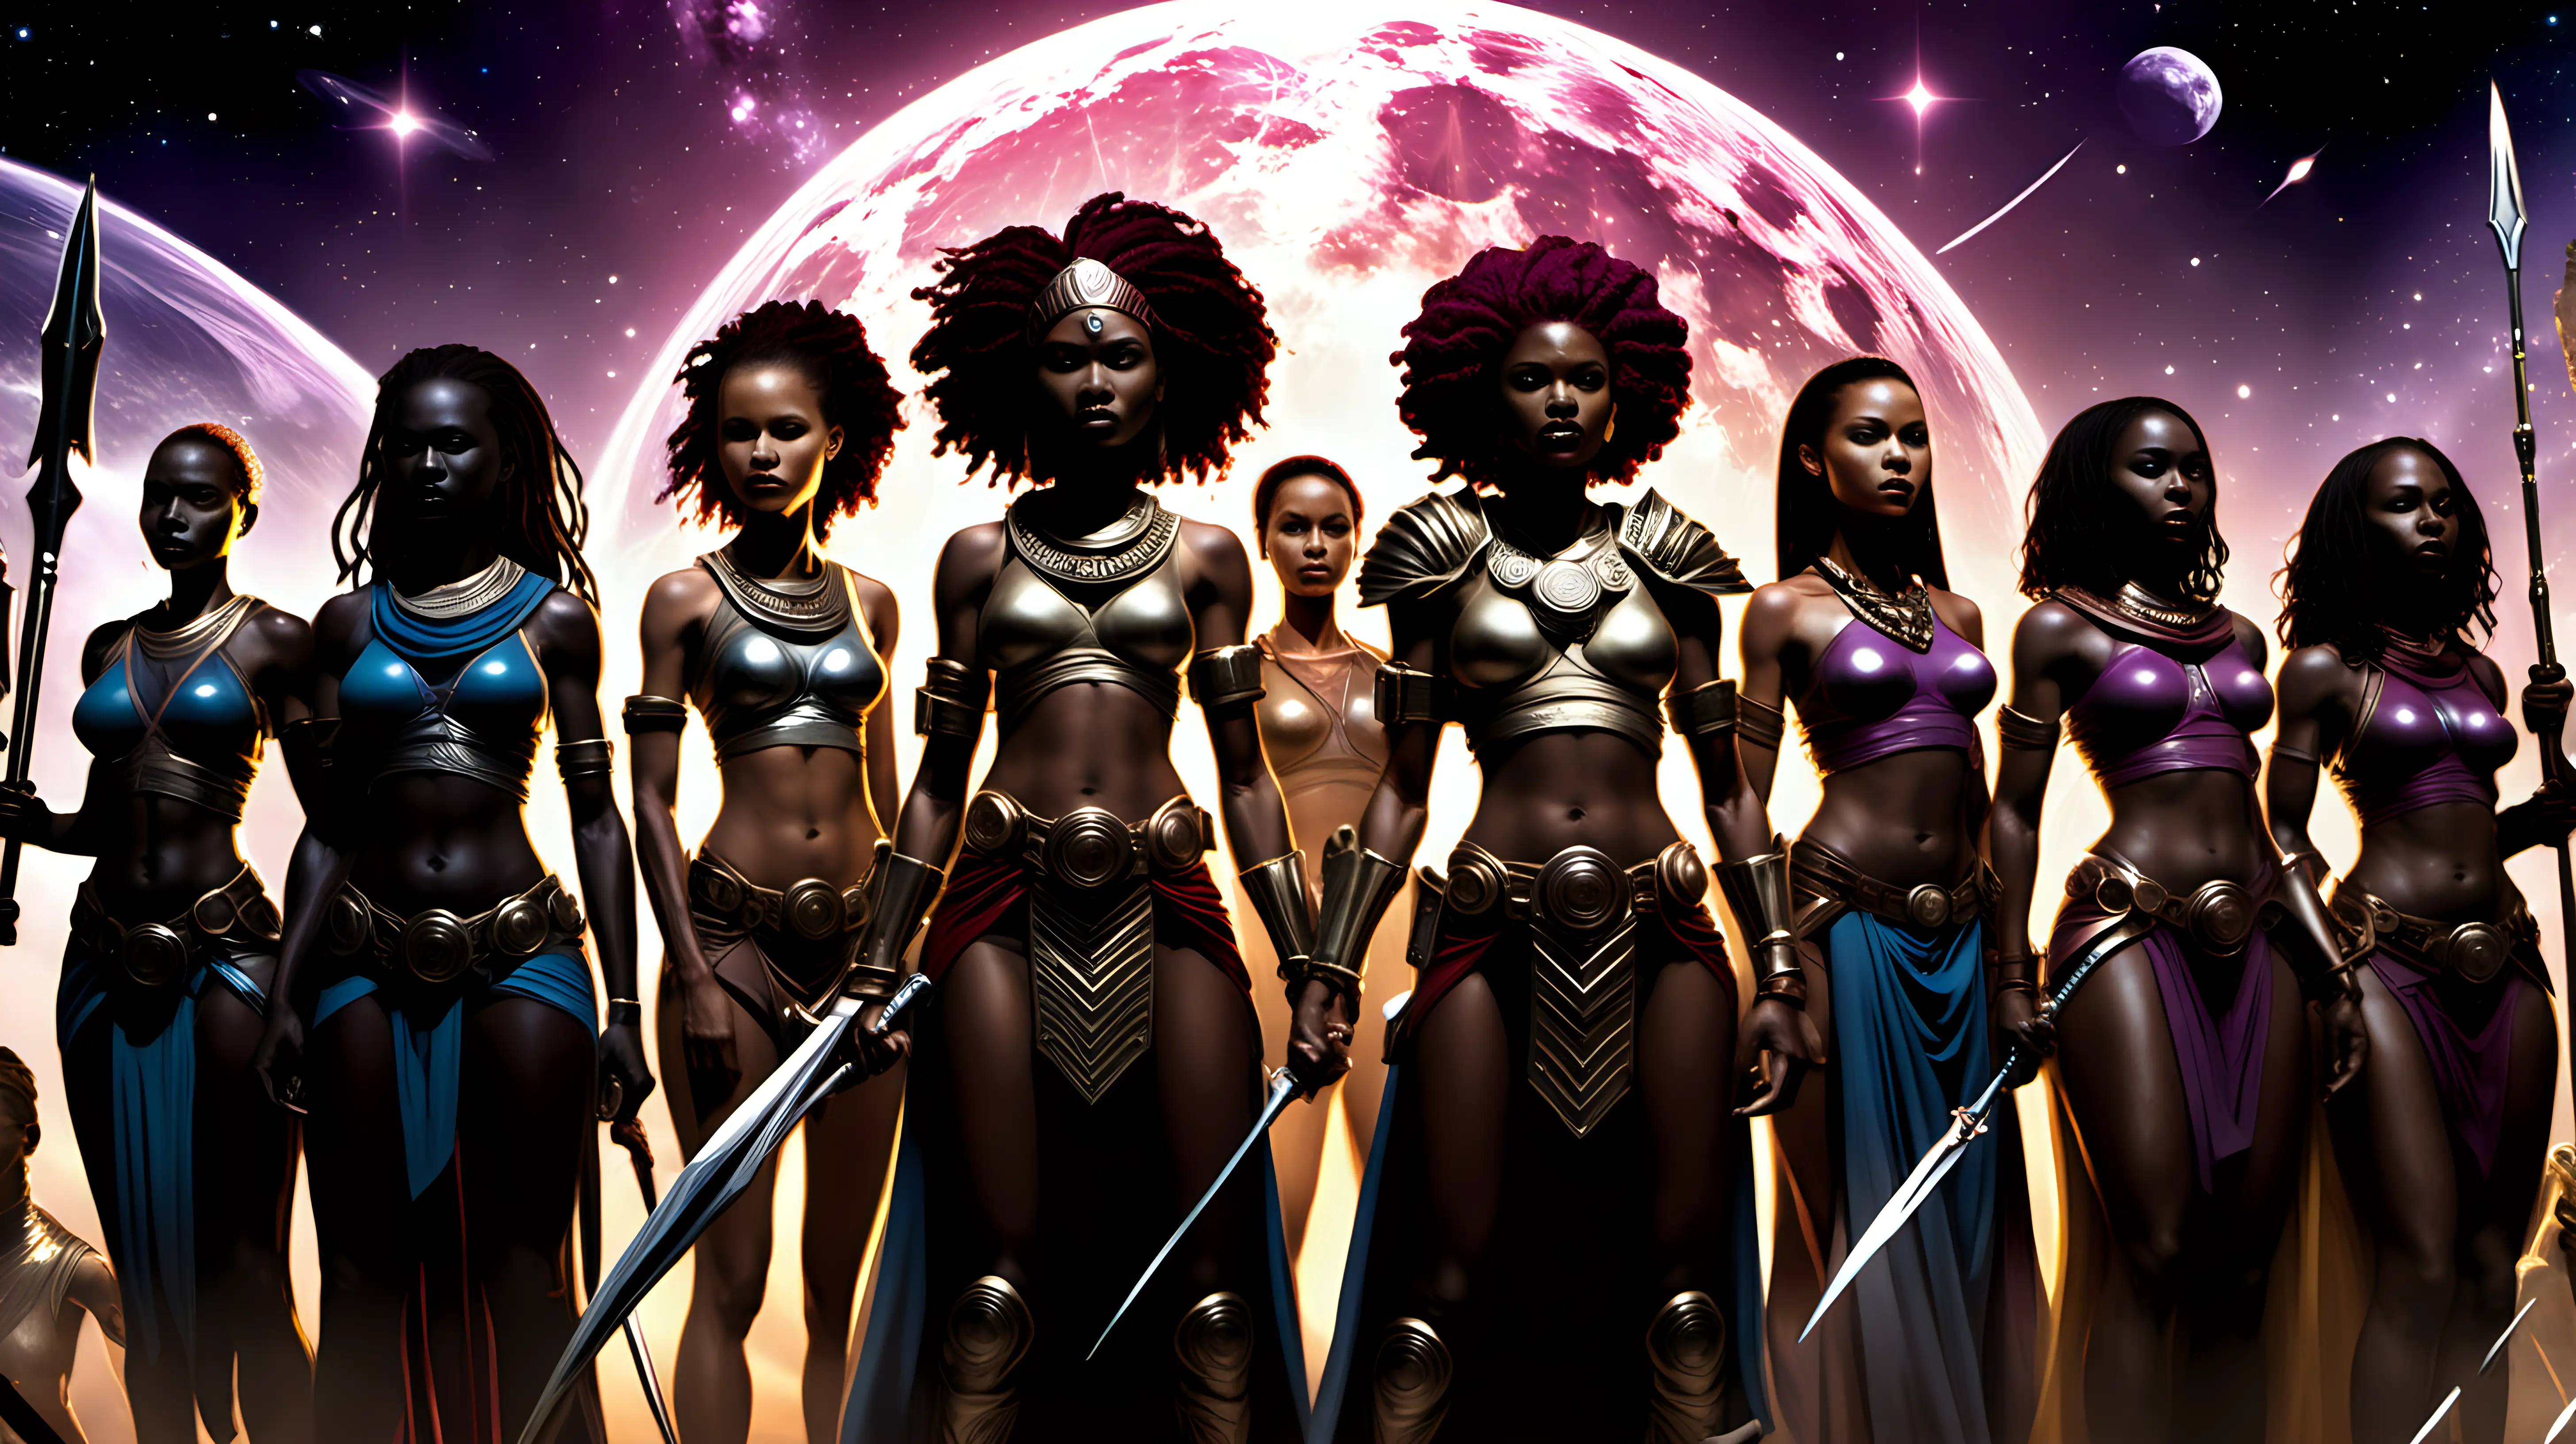 Galactic Unity Seraphina the Young African Warrior Leading Diverse Beings